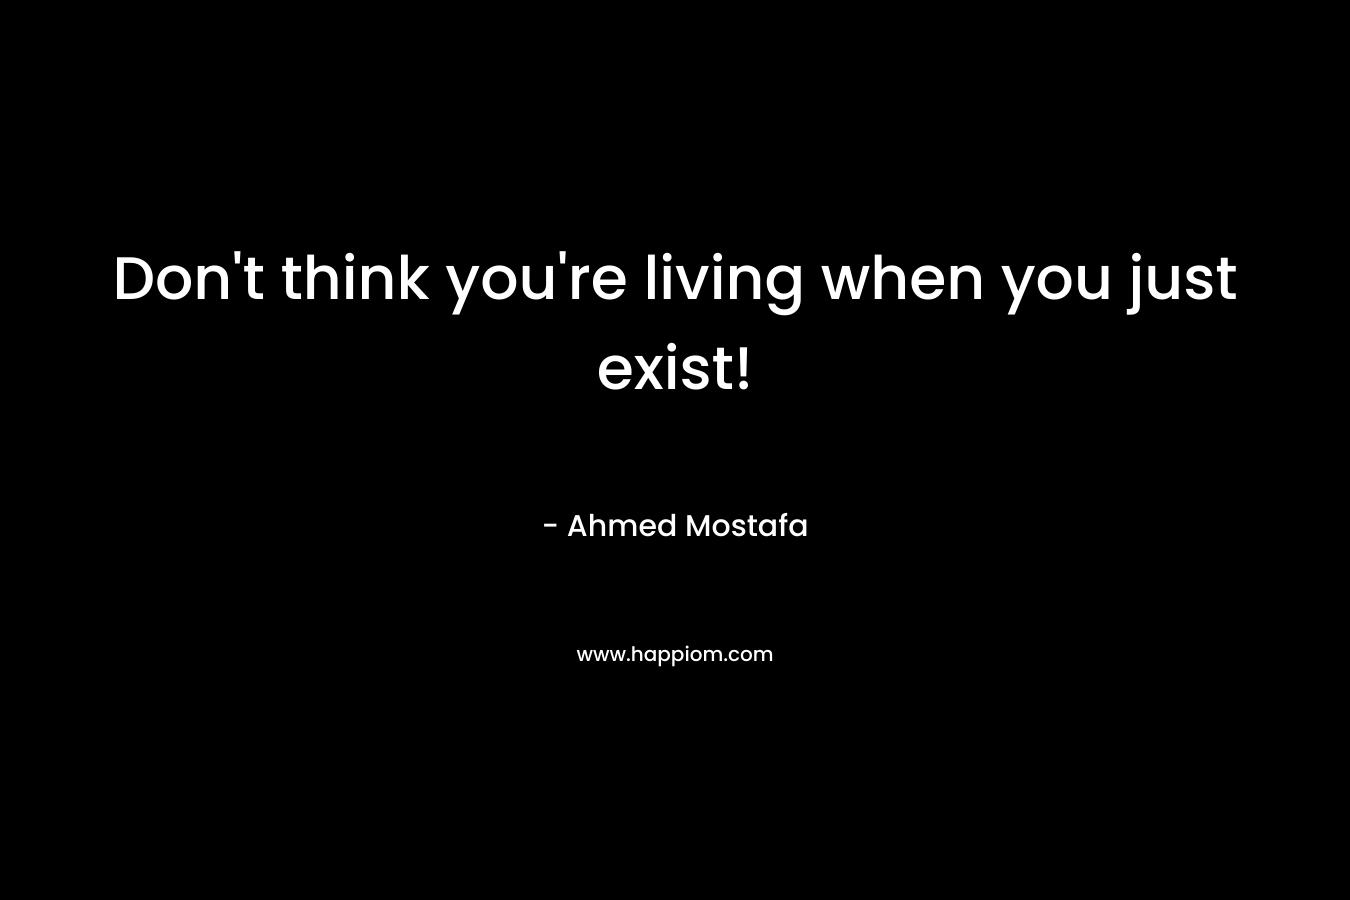 Don't think you're living when you just exist!